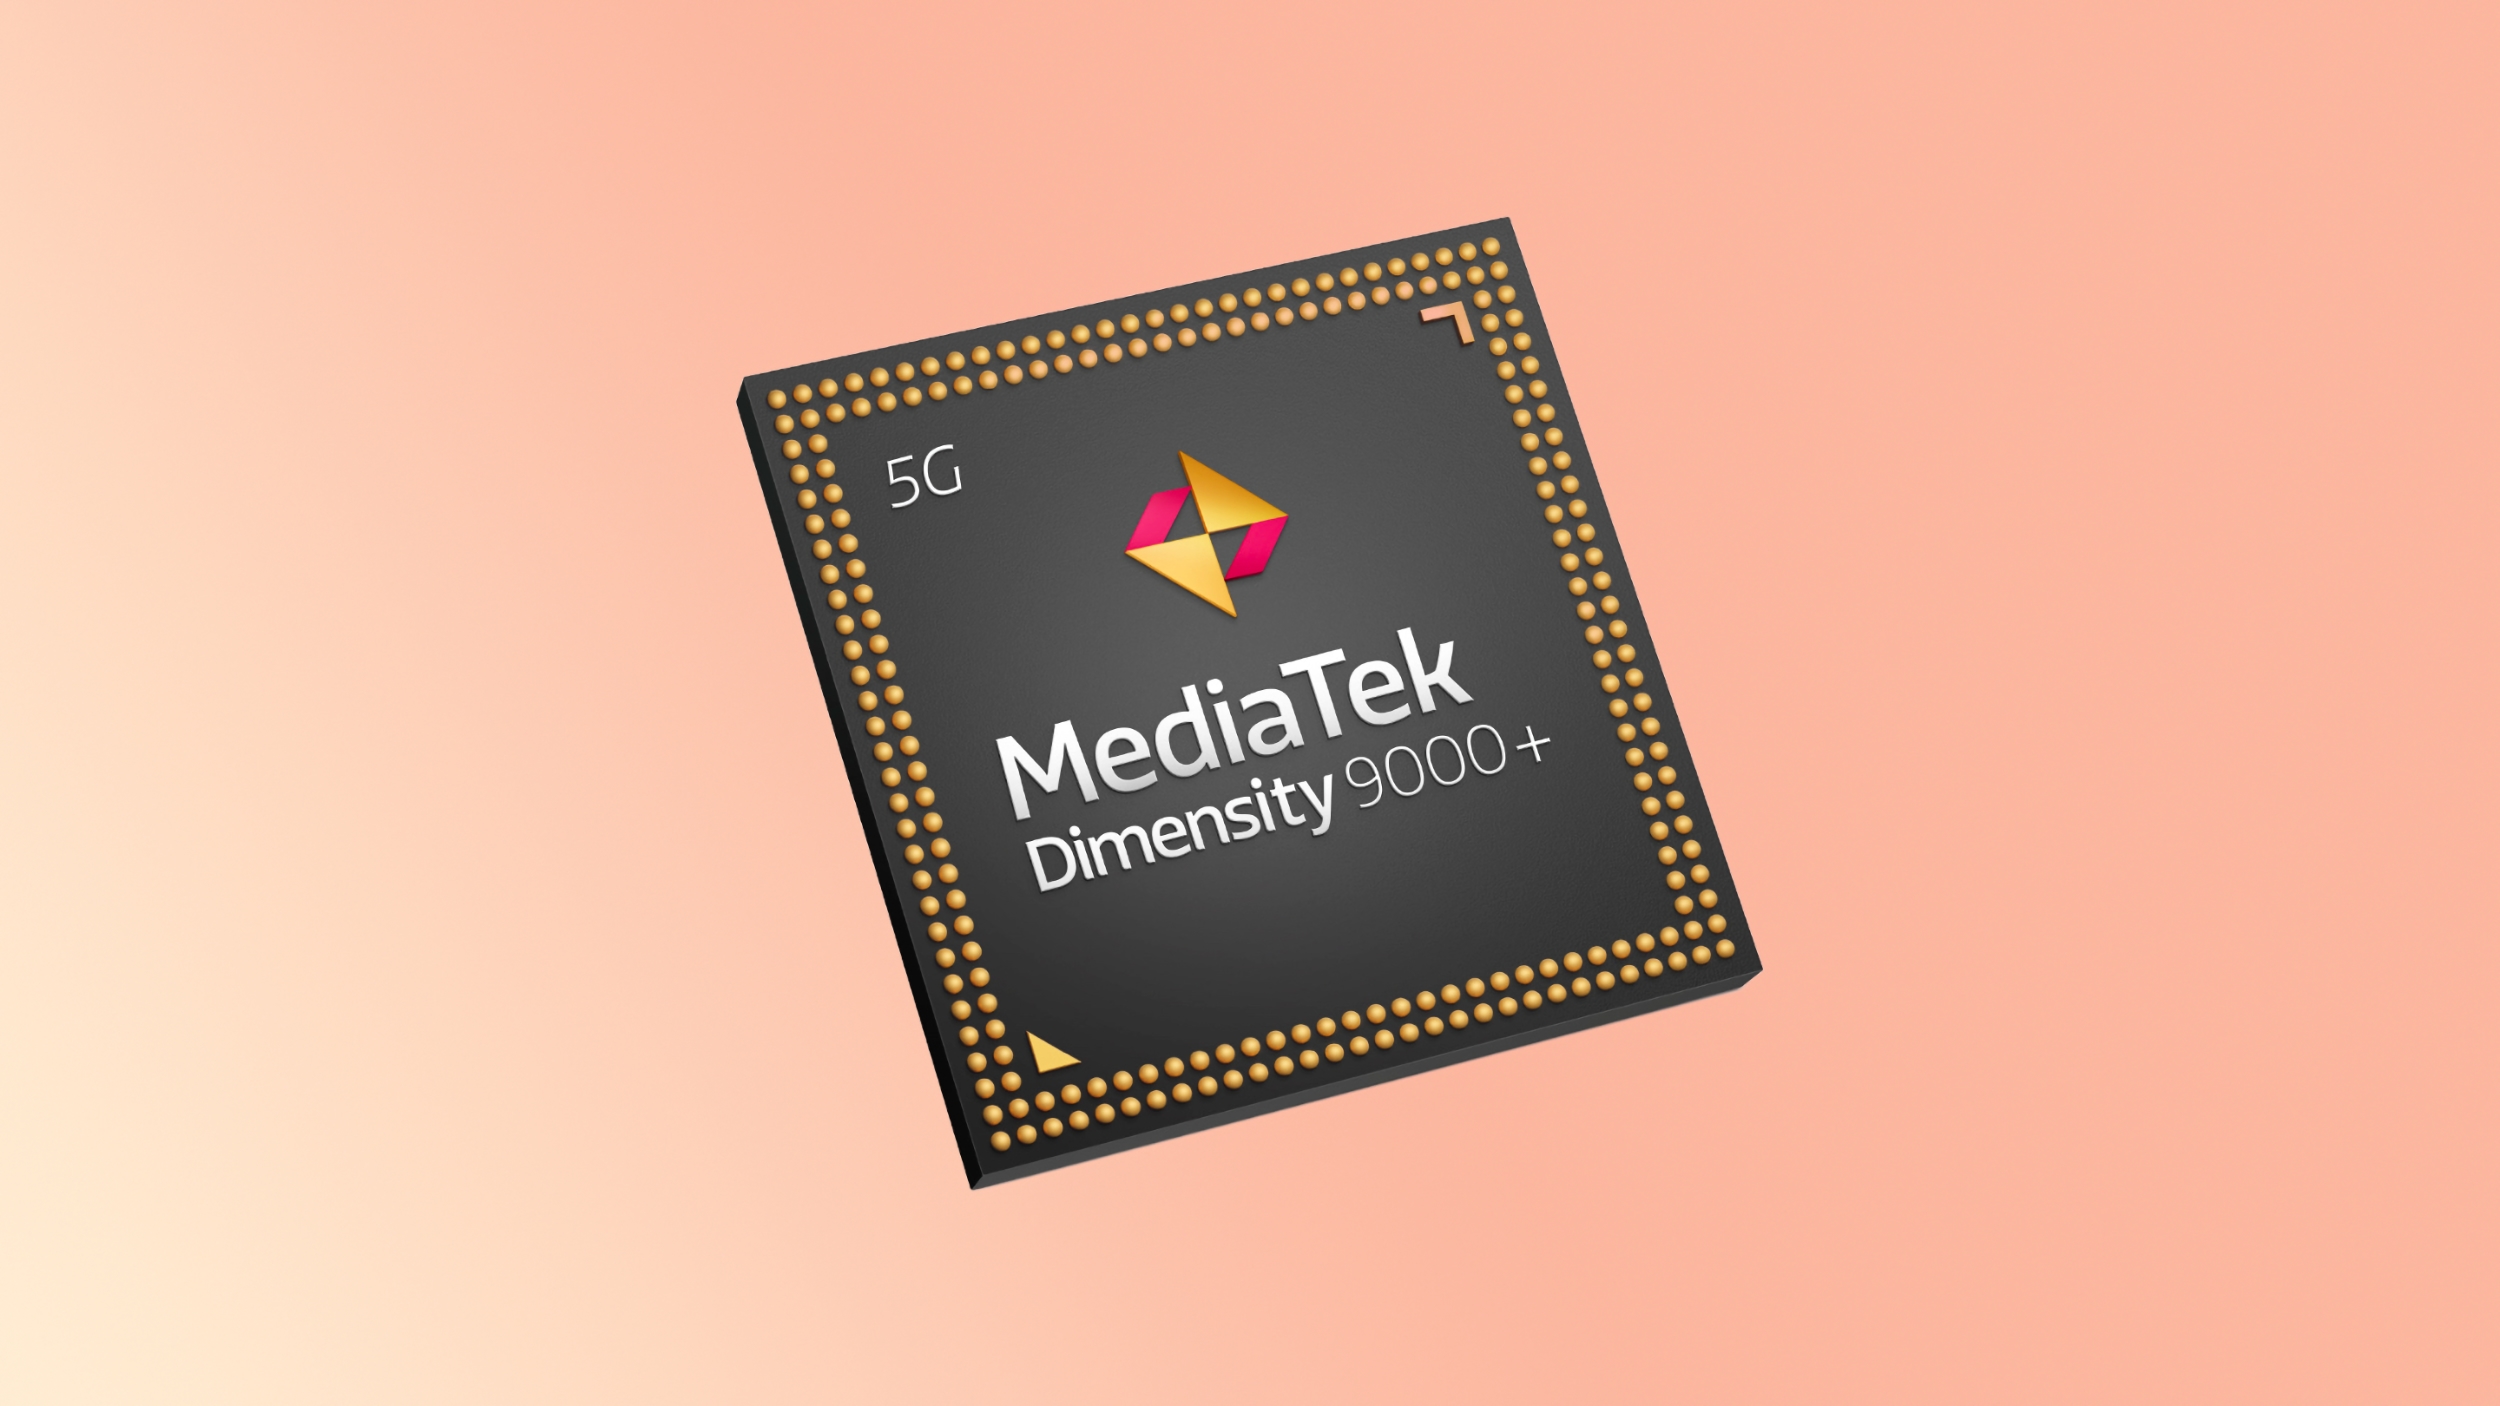 MediaTek unveils flagship Dimensity 9000+ chip to compete with Exynos 2200 and Snapdragon 8+ Gen 1